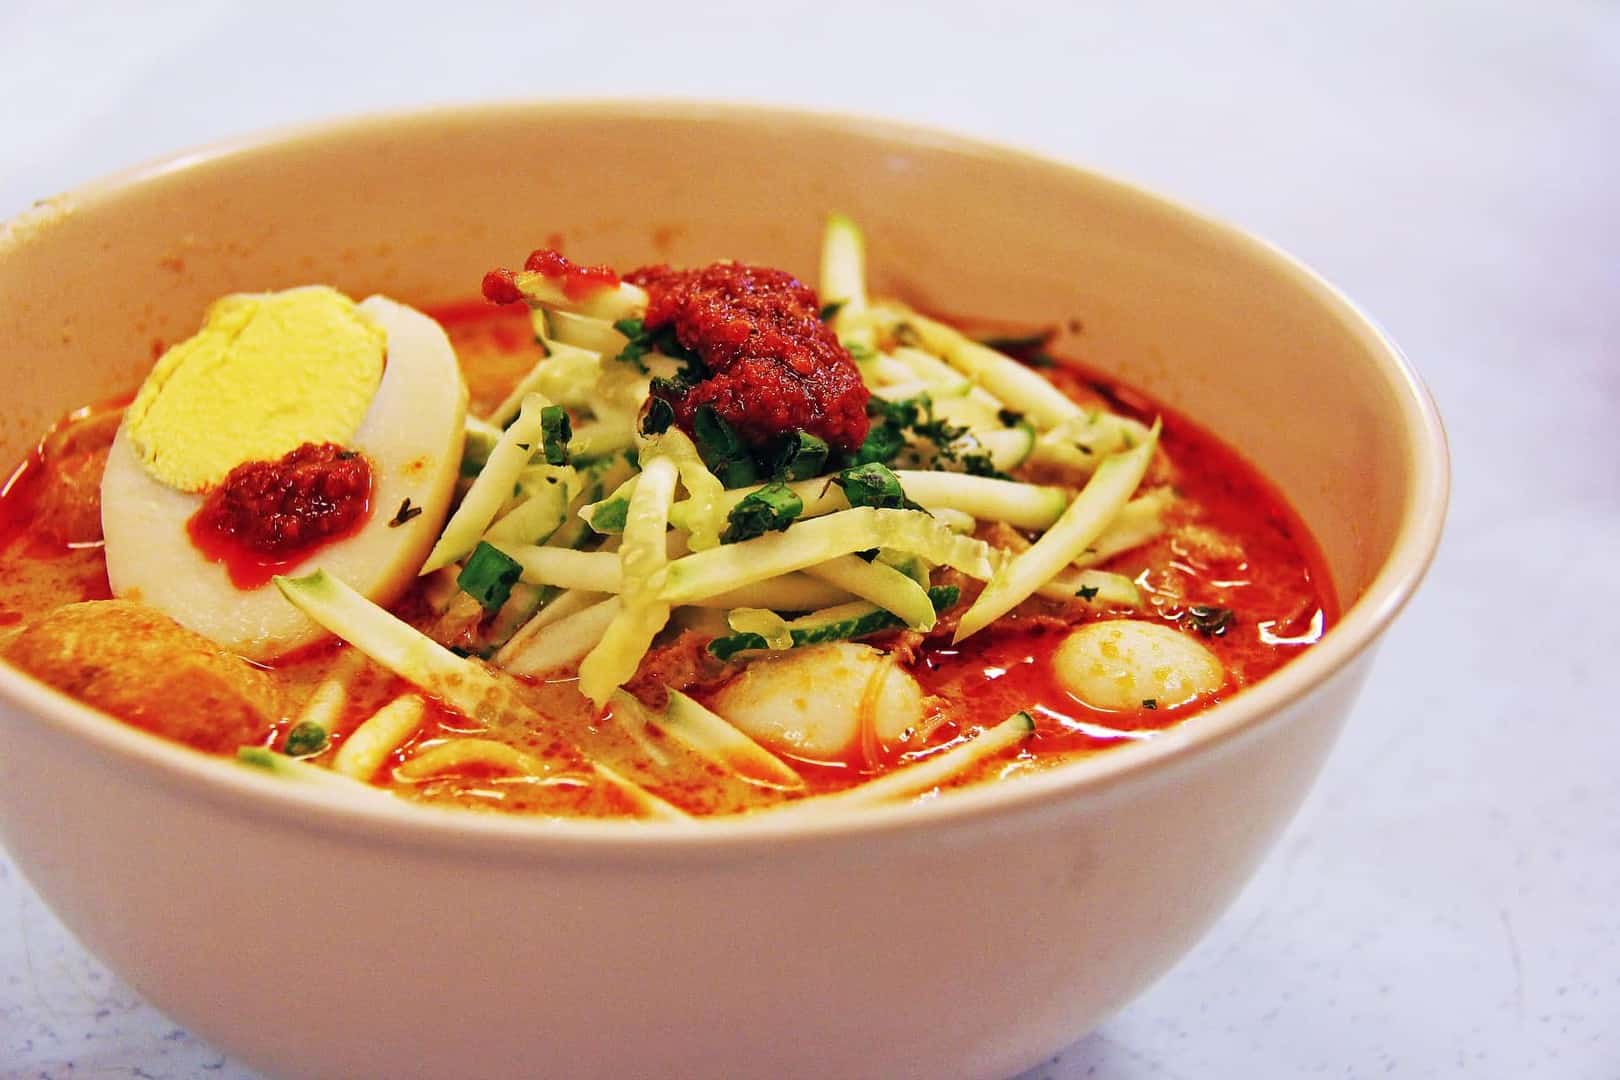 Laksa, a spicy noodle soup, is another favorite in Singapore